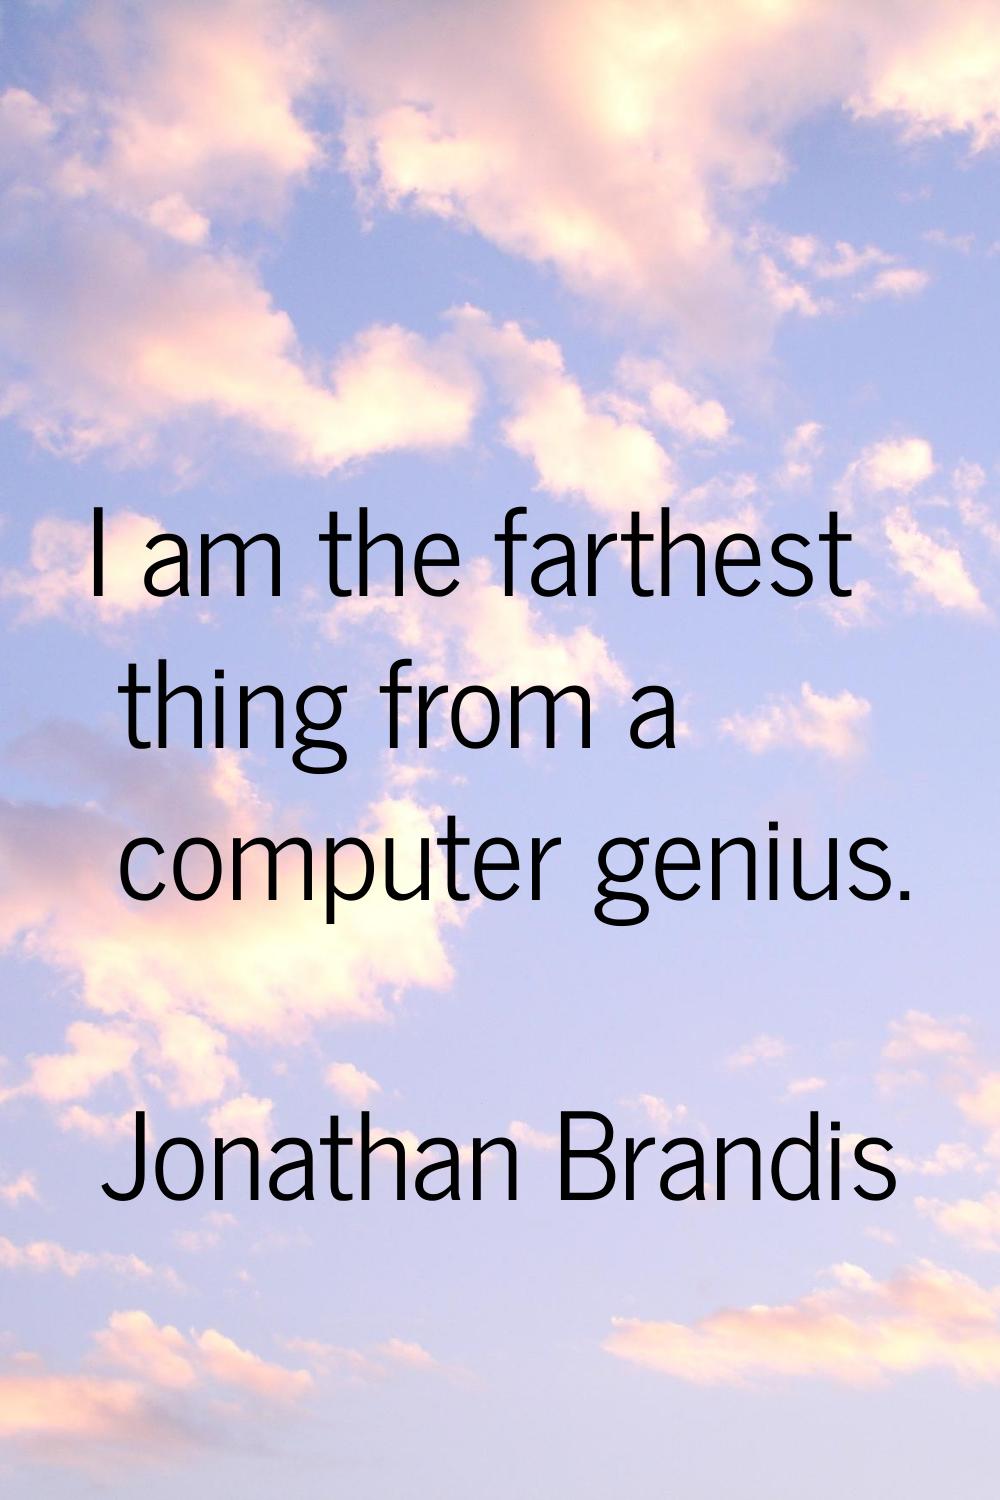 I am the farthest thing from a computer genius.